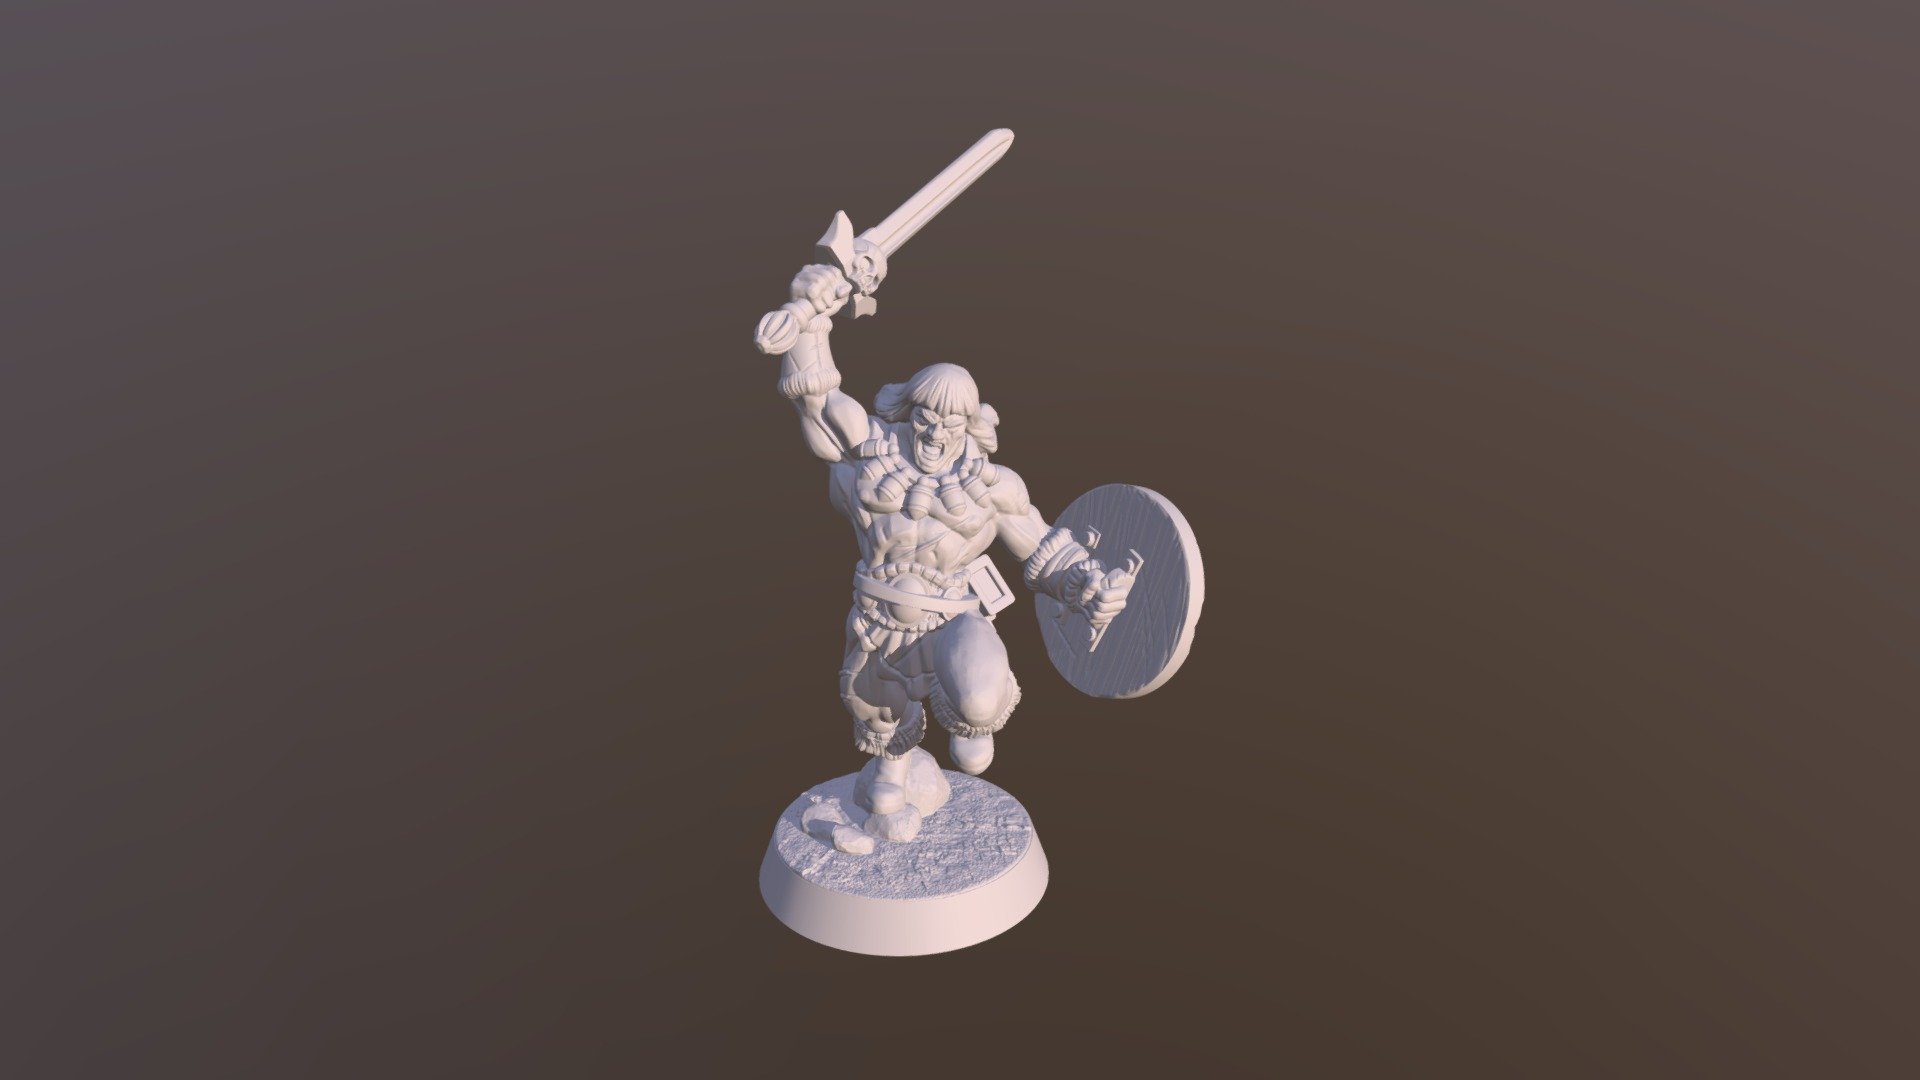 Classic Barbarian (35mm scale) (http://www.thingiverse.com/thing:3470531) by Claudio_Setti_Studio is licensed under the Creative Commons - Attribution - Non-Commercial - No Derivatives license.
http://creativecommons.org/licenses/by-nc-nd/3.0/ - Classic Barbarian W Base1 0 - 3D model by cplasenc 3d model